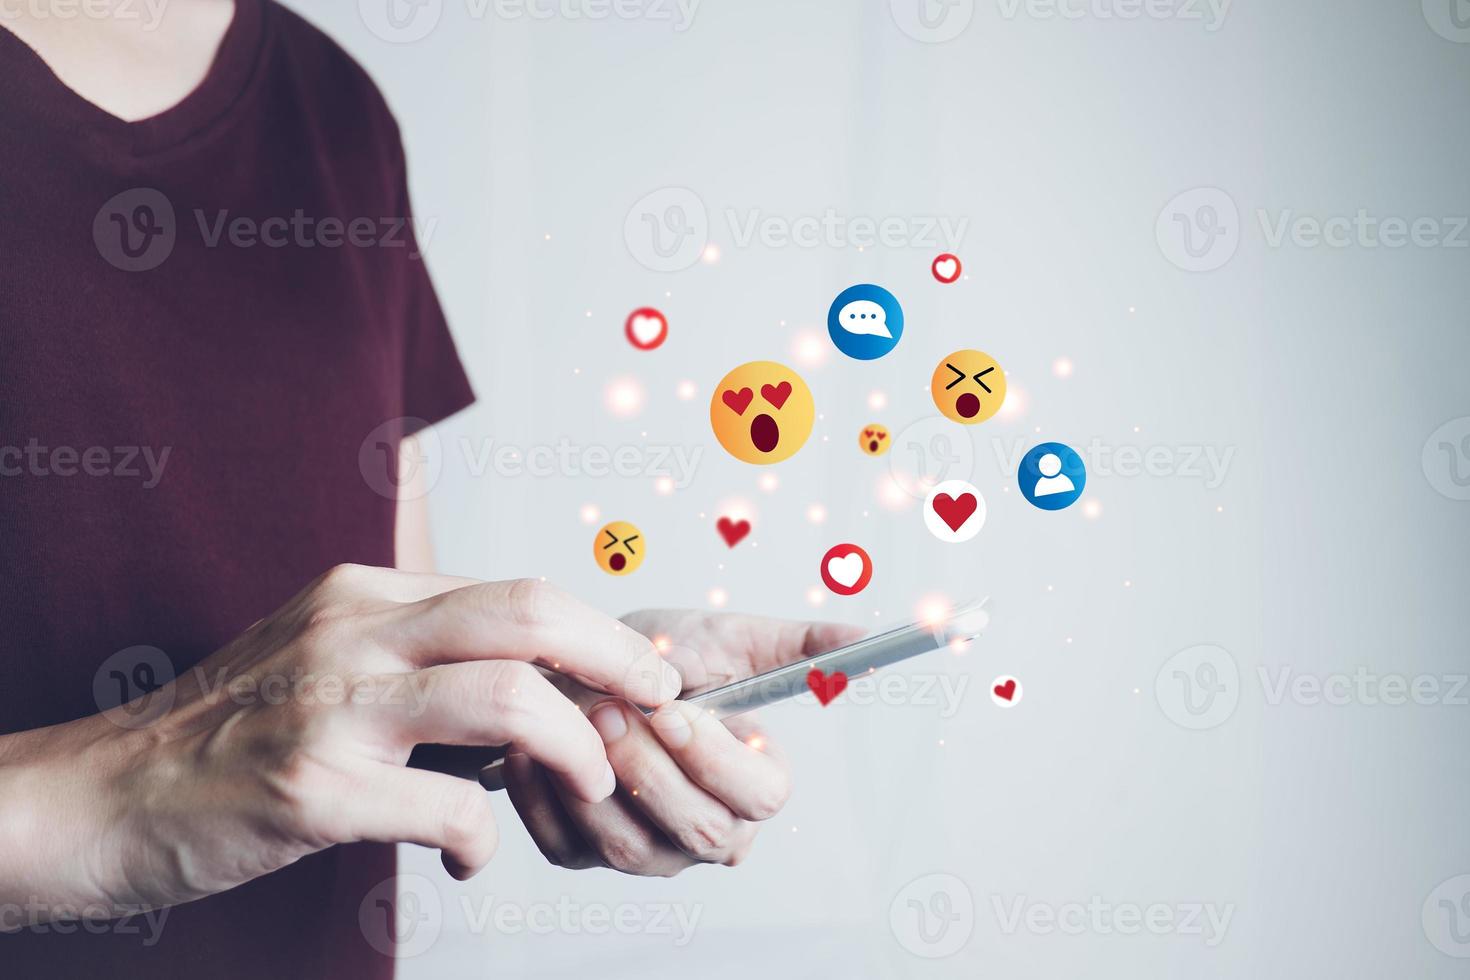 Concept of using digital media, technology, social media online surfing, woman's hand using smartphone to use the internet, work from home for social distancing. photo